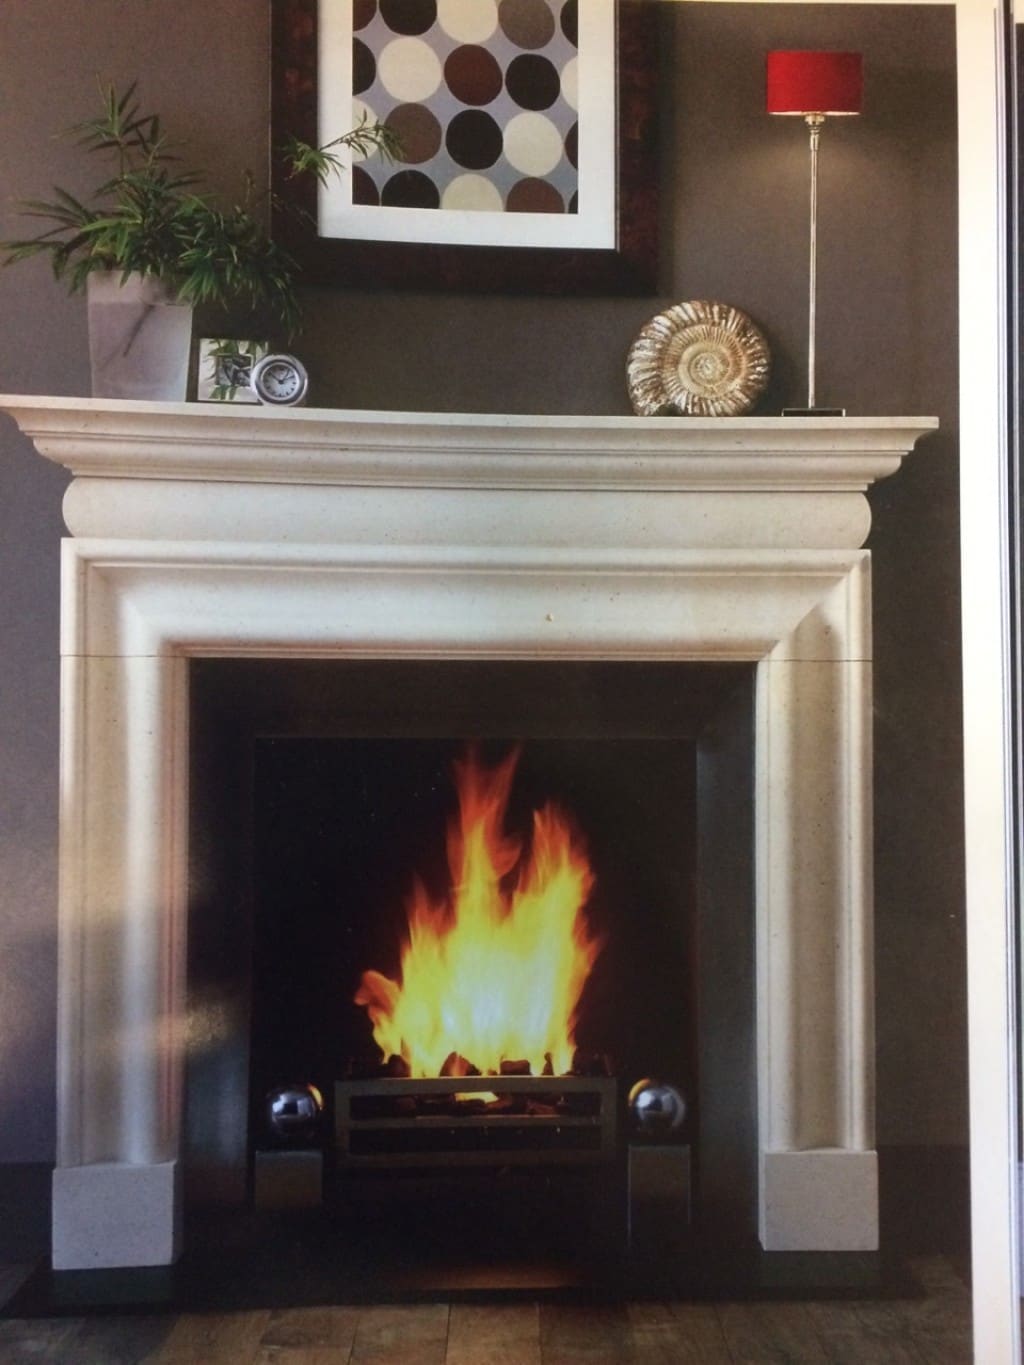 Blog - A tile fireplace with a DPD system or a traditional tile fireplace?